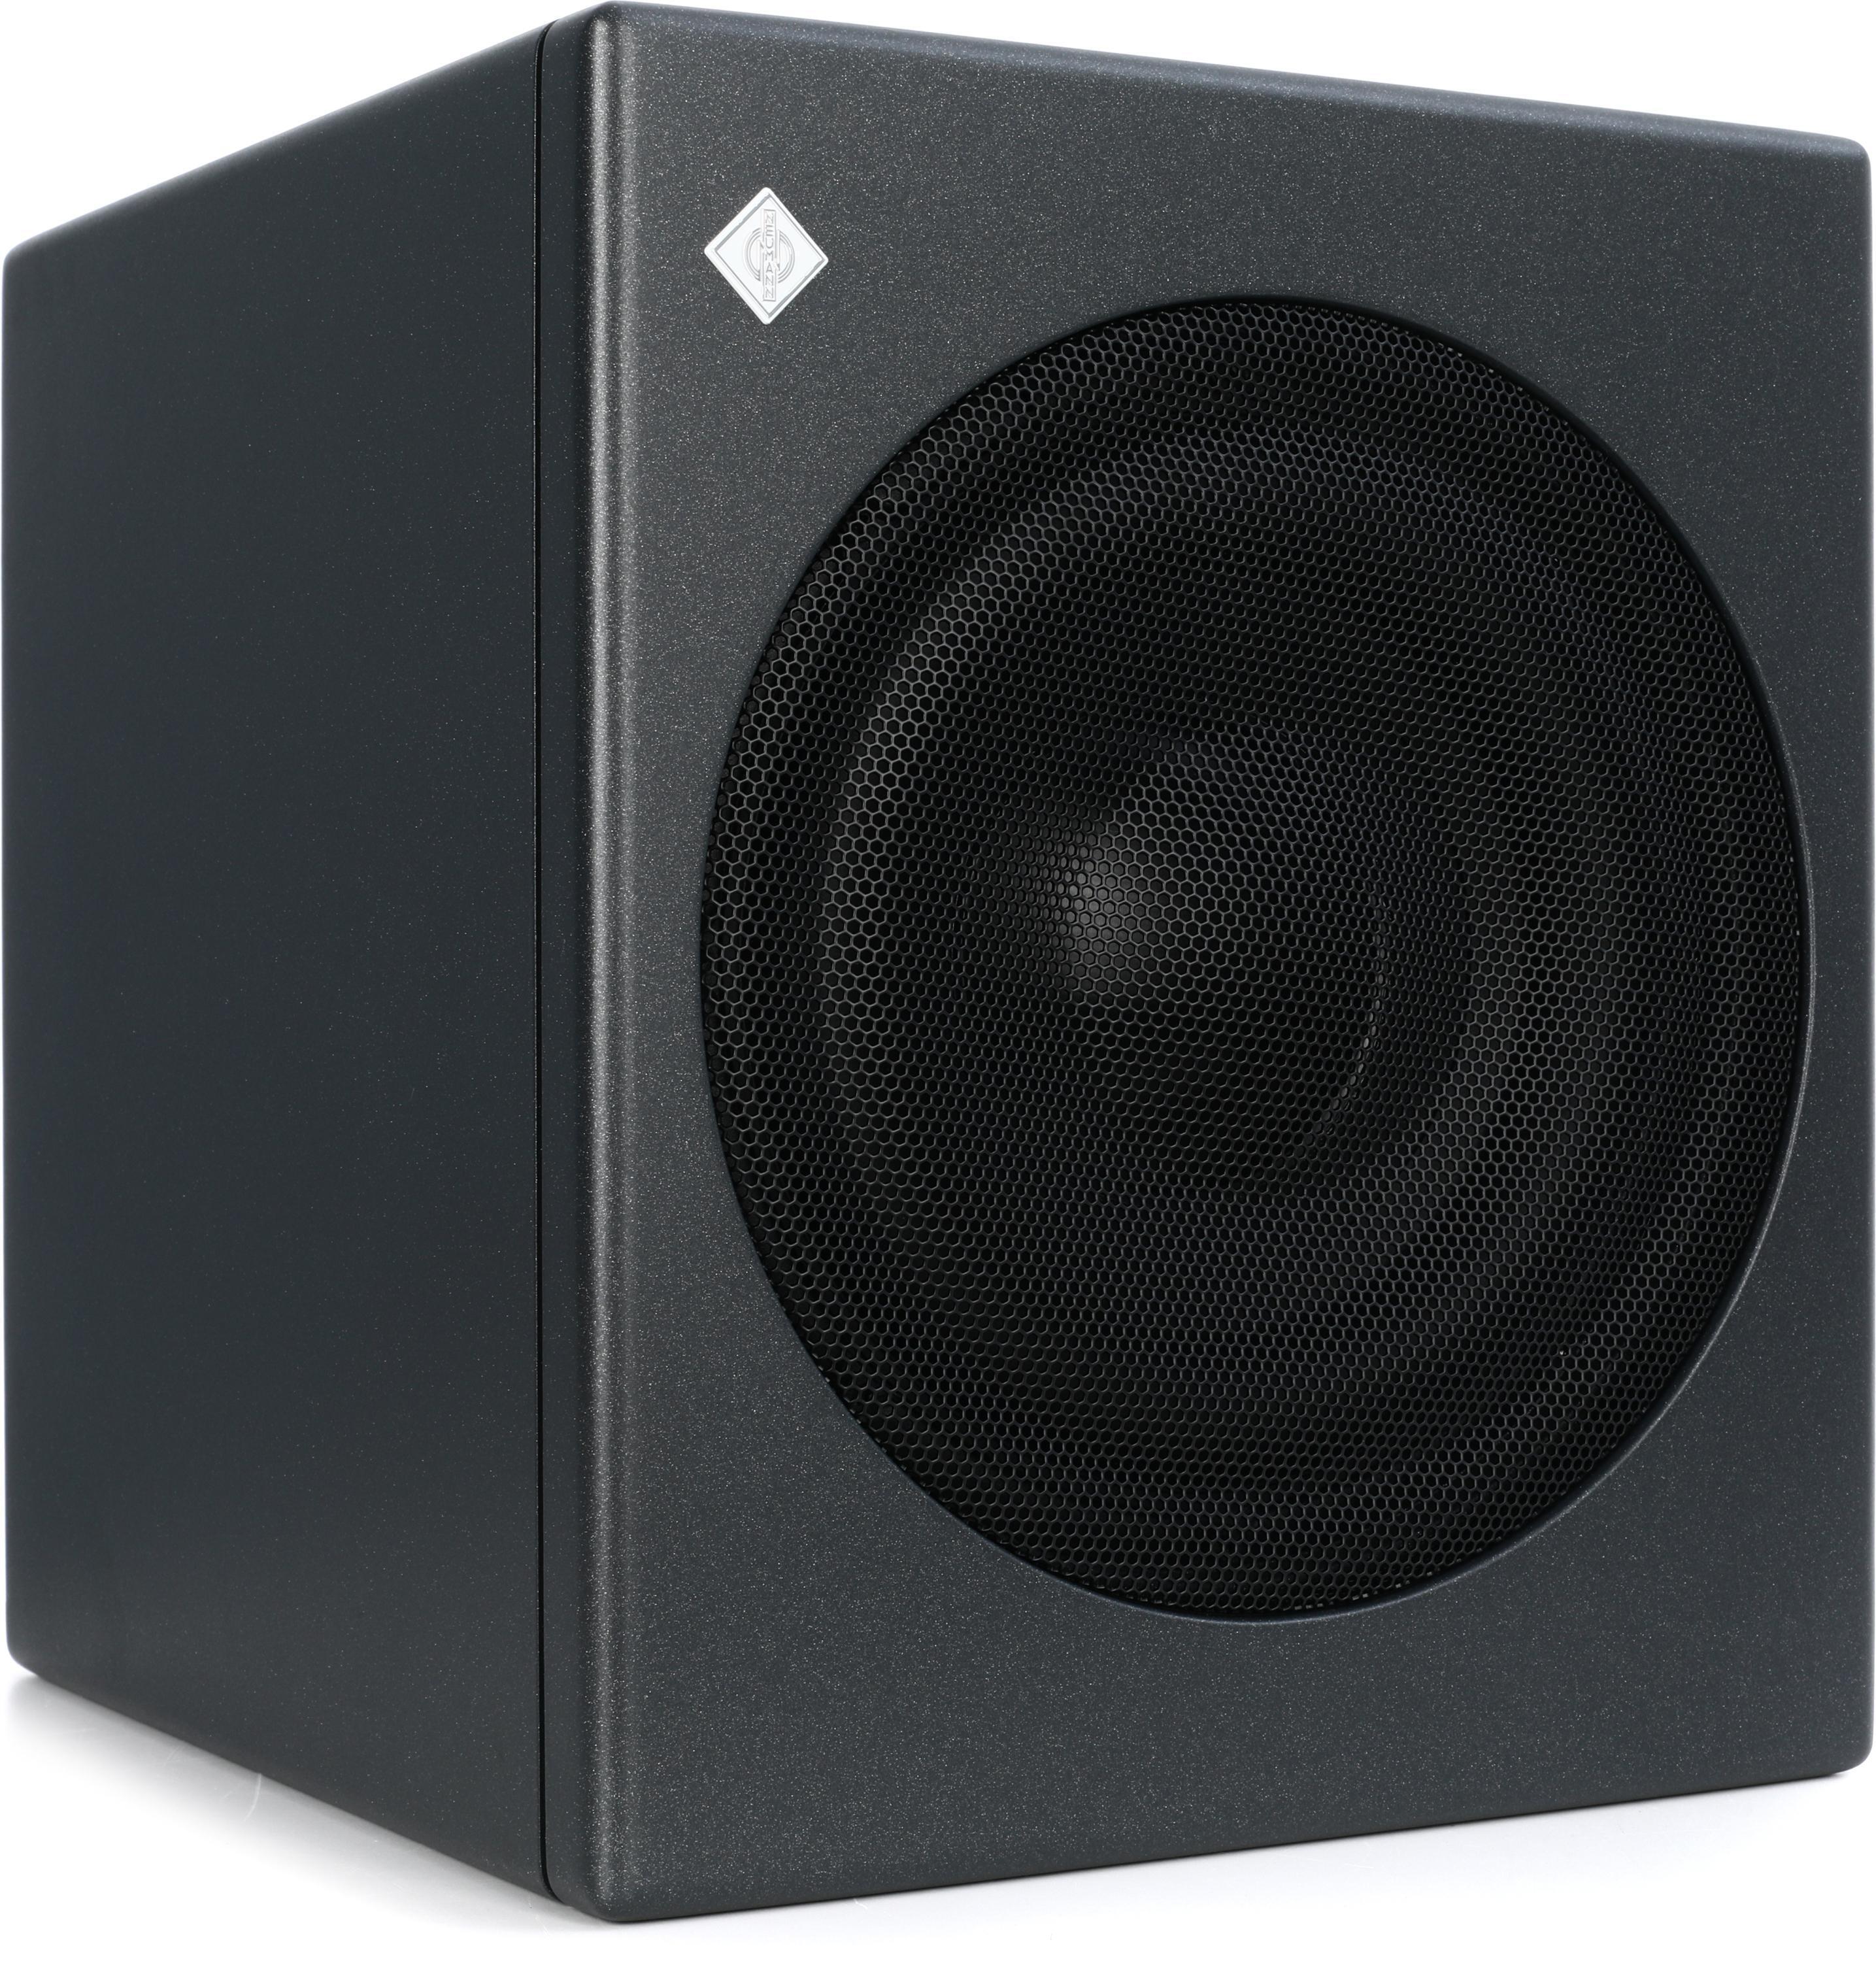 Neumann KH 750 10 inch Powered Studio Subwoofer | Sweetwater